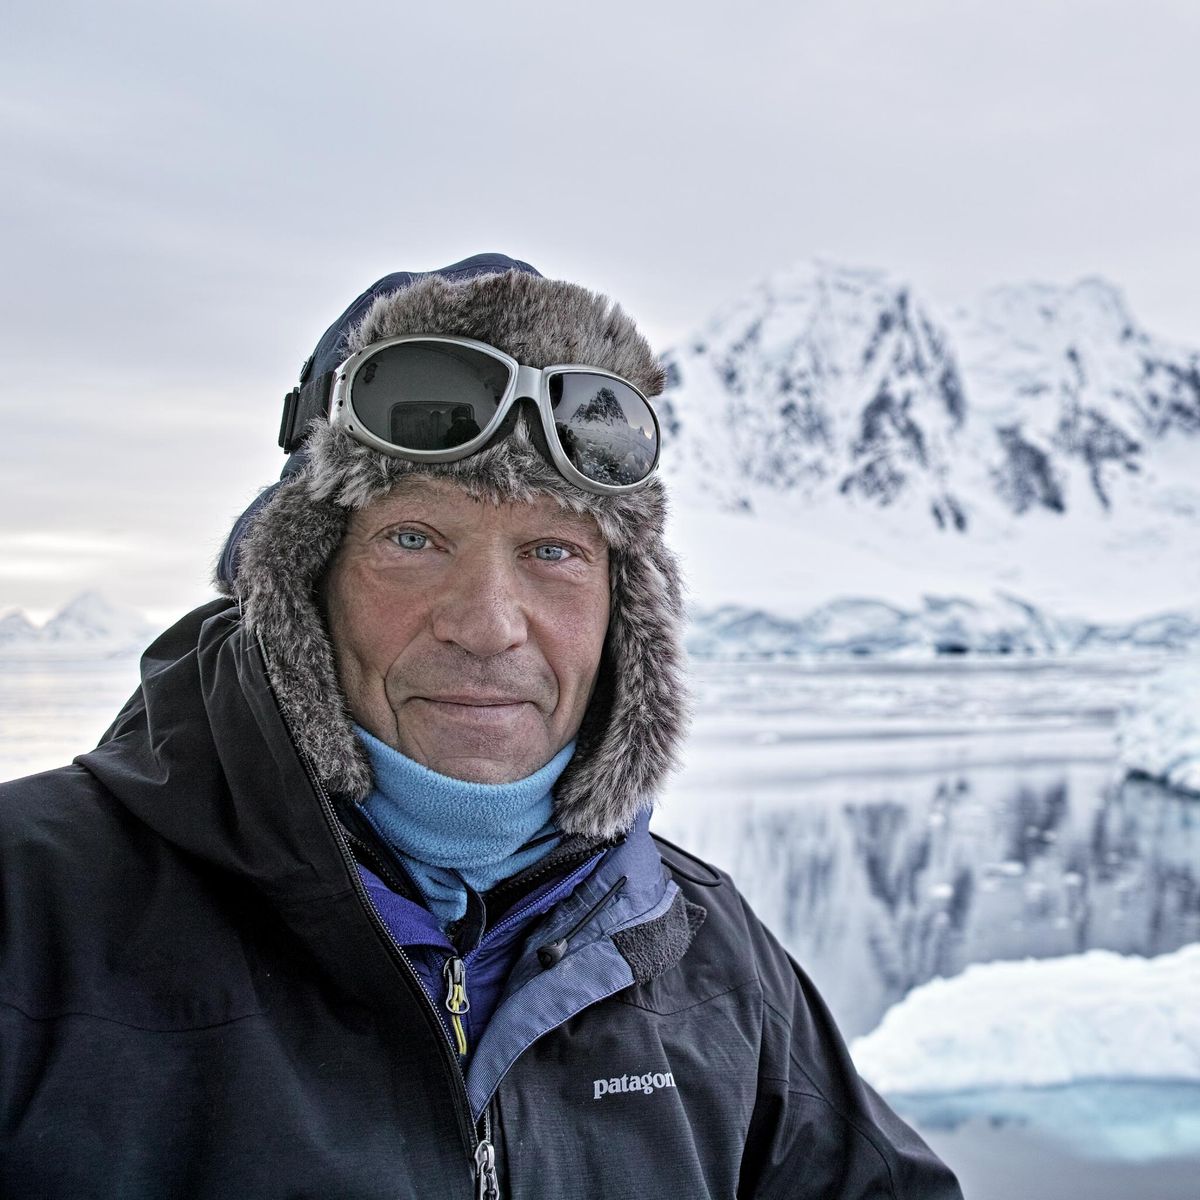 Famed Adventurer Robert Swan to be Featured at Learning 2019!